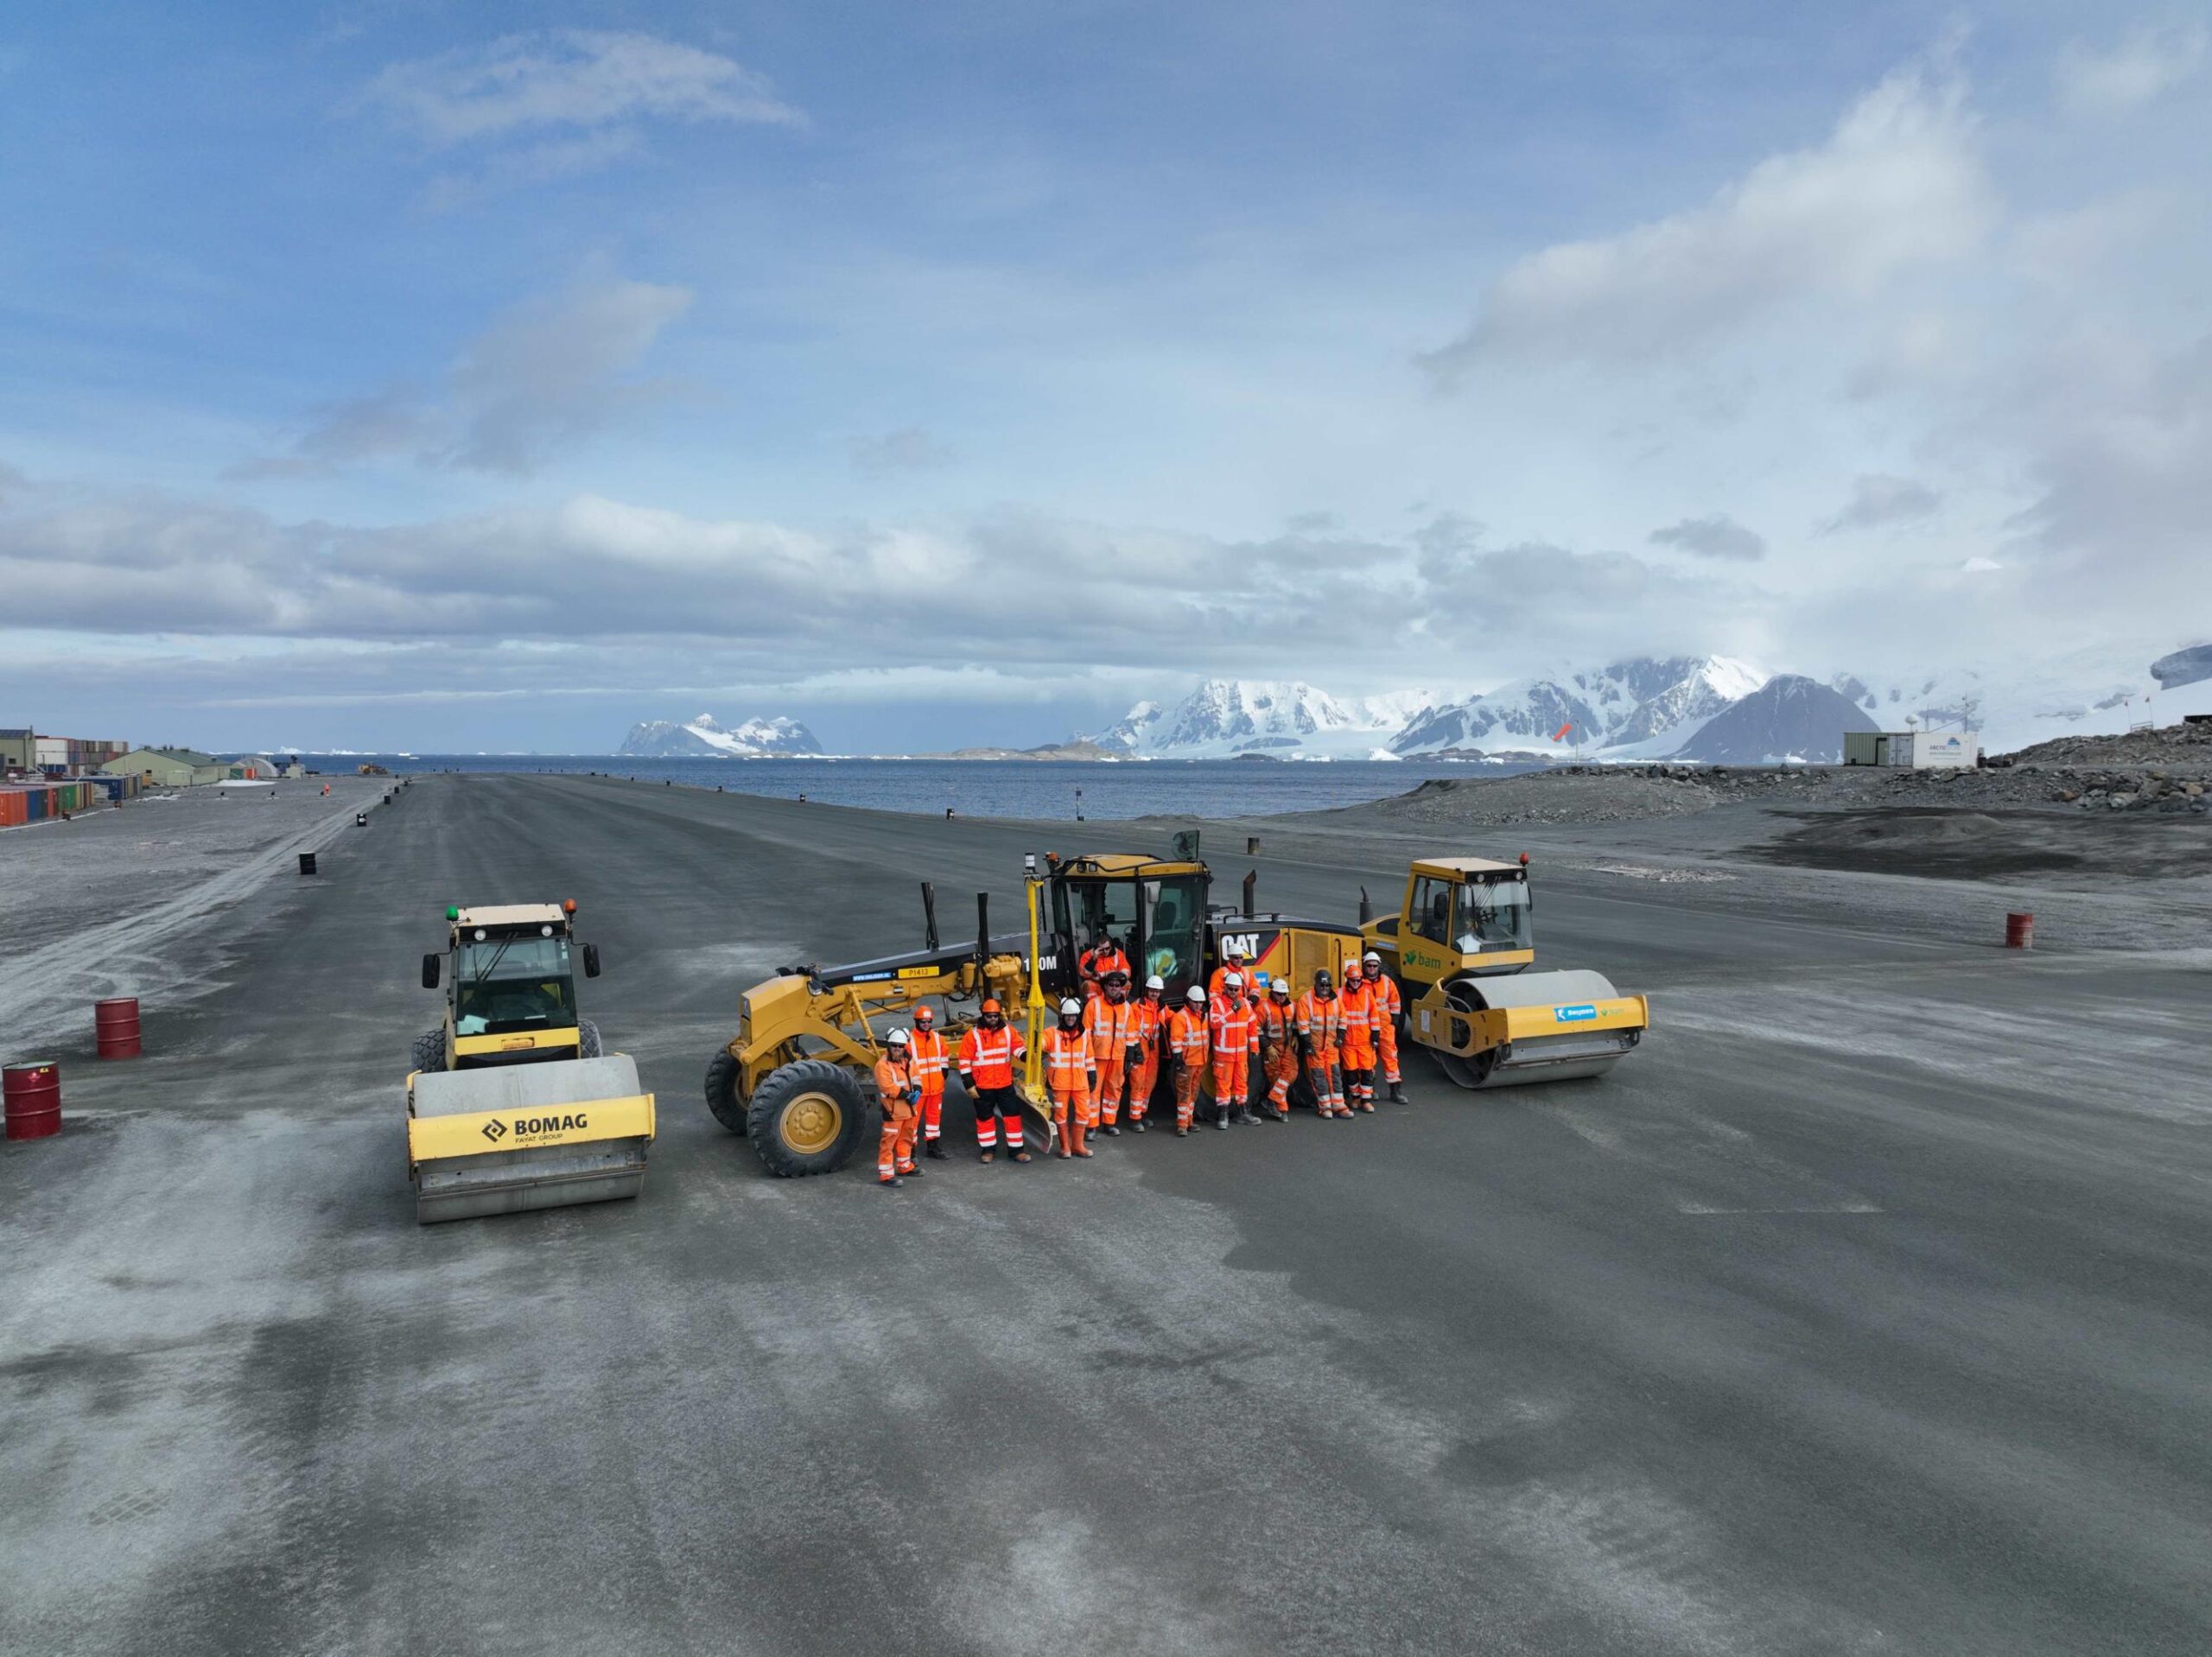 A group of construction workers standing on a runway with snowy mountains in the background.